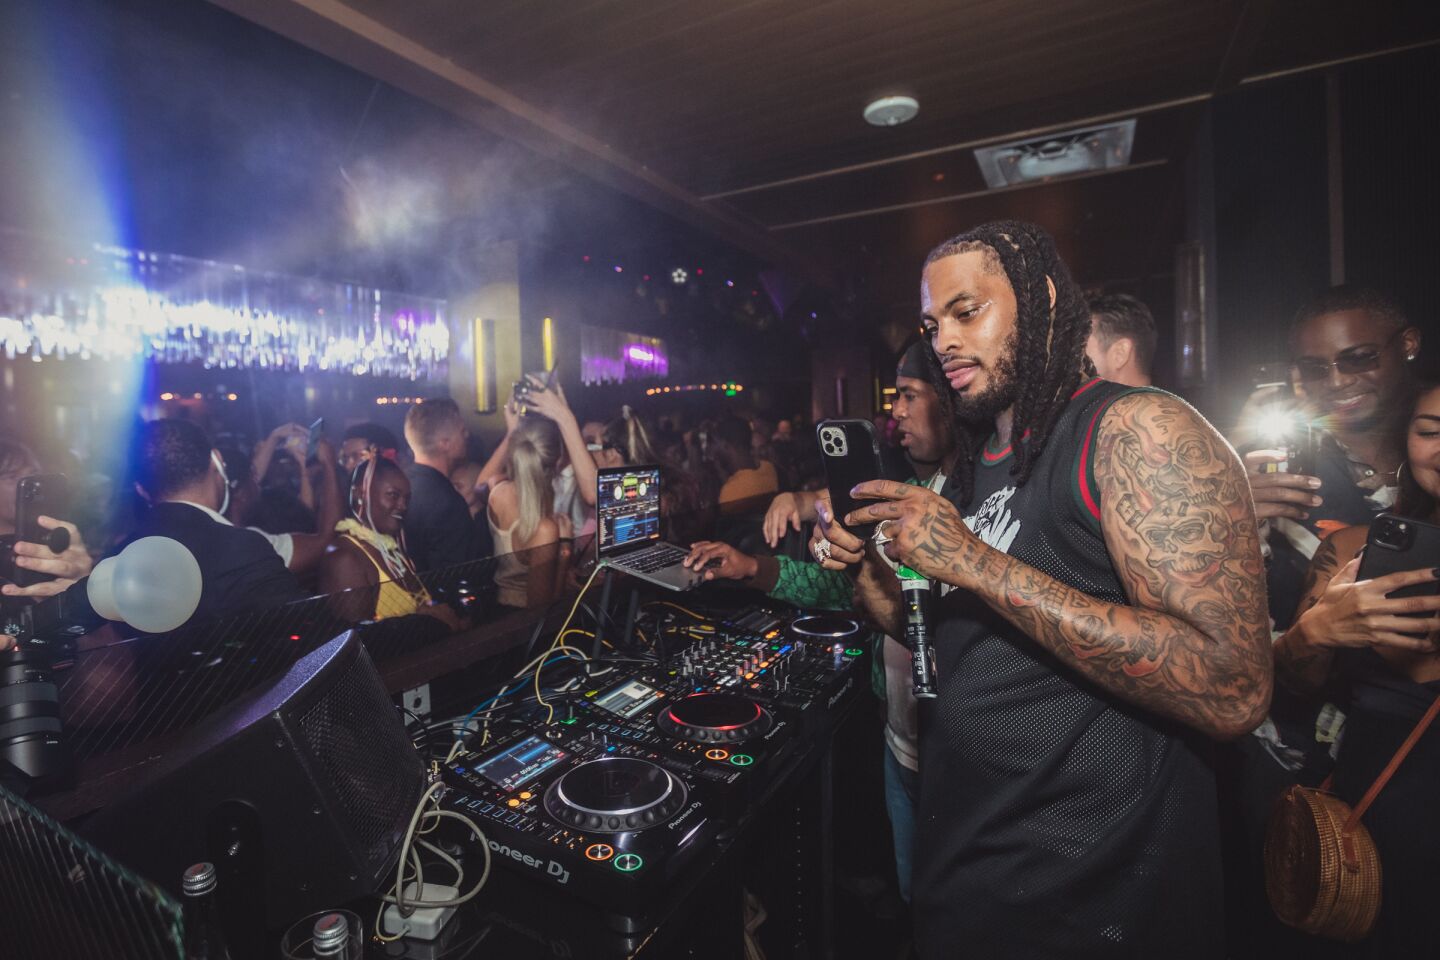 Rapper Waka Flocka Flame showed SD a good time when he appeared at Oxford Social Club over Labor Day weekend.